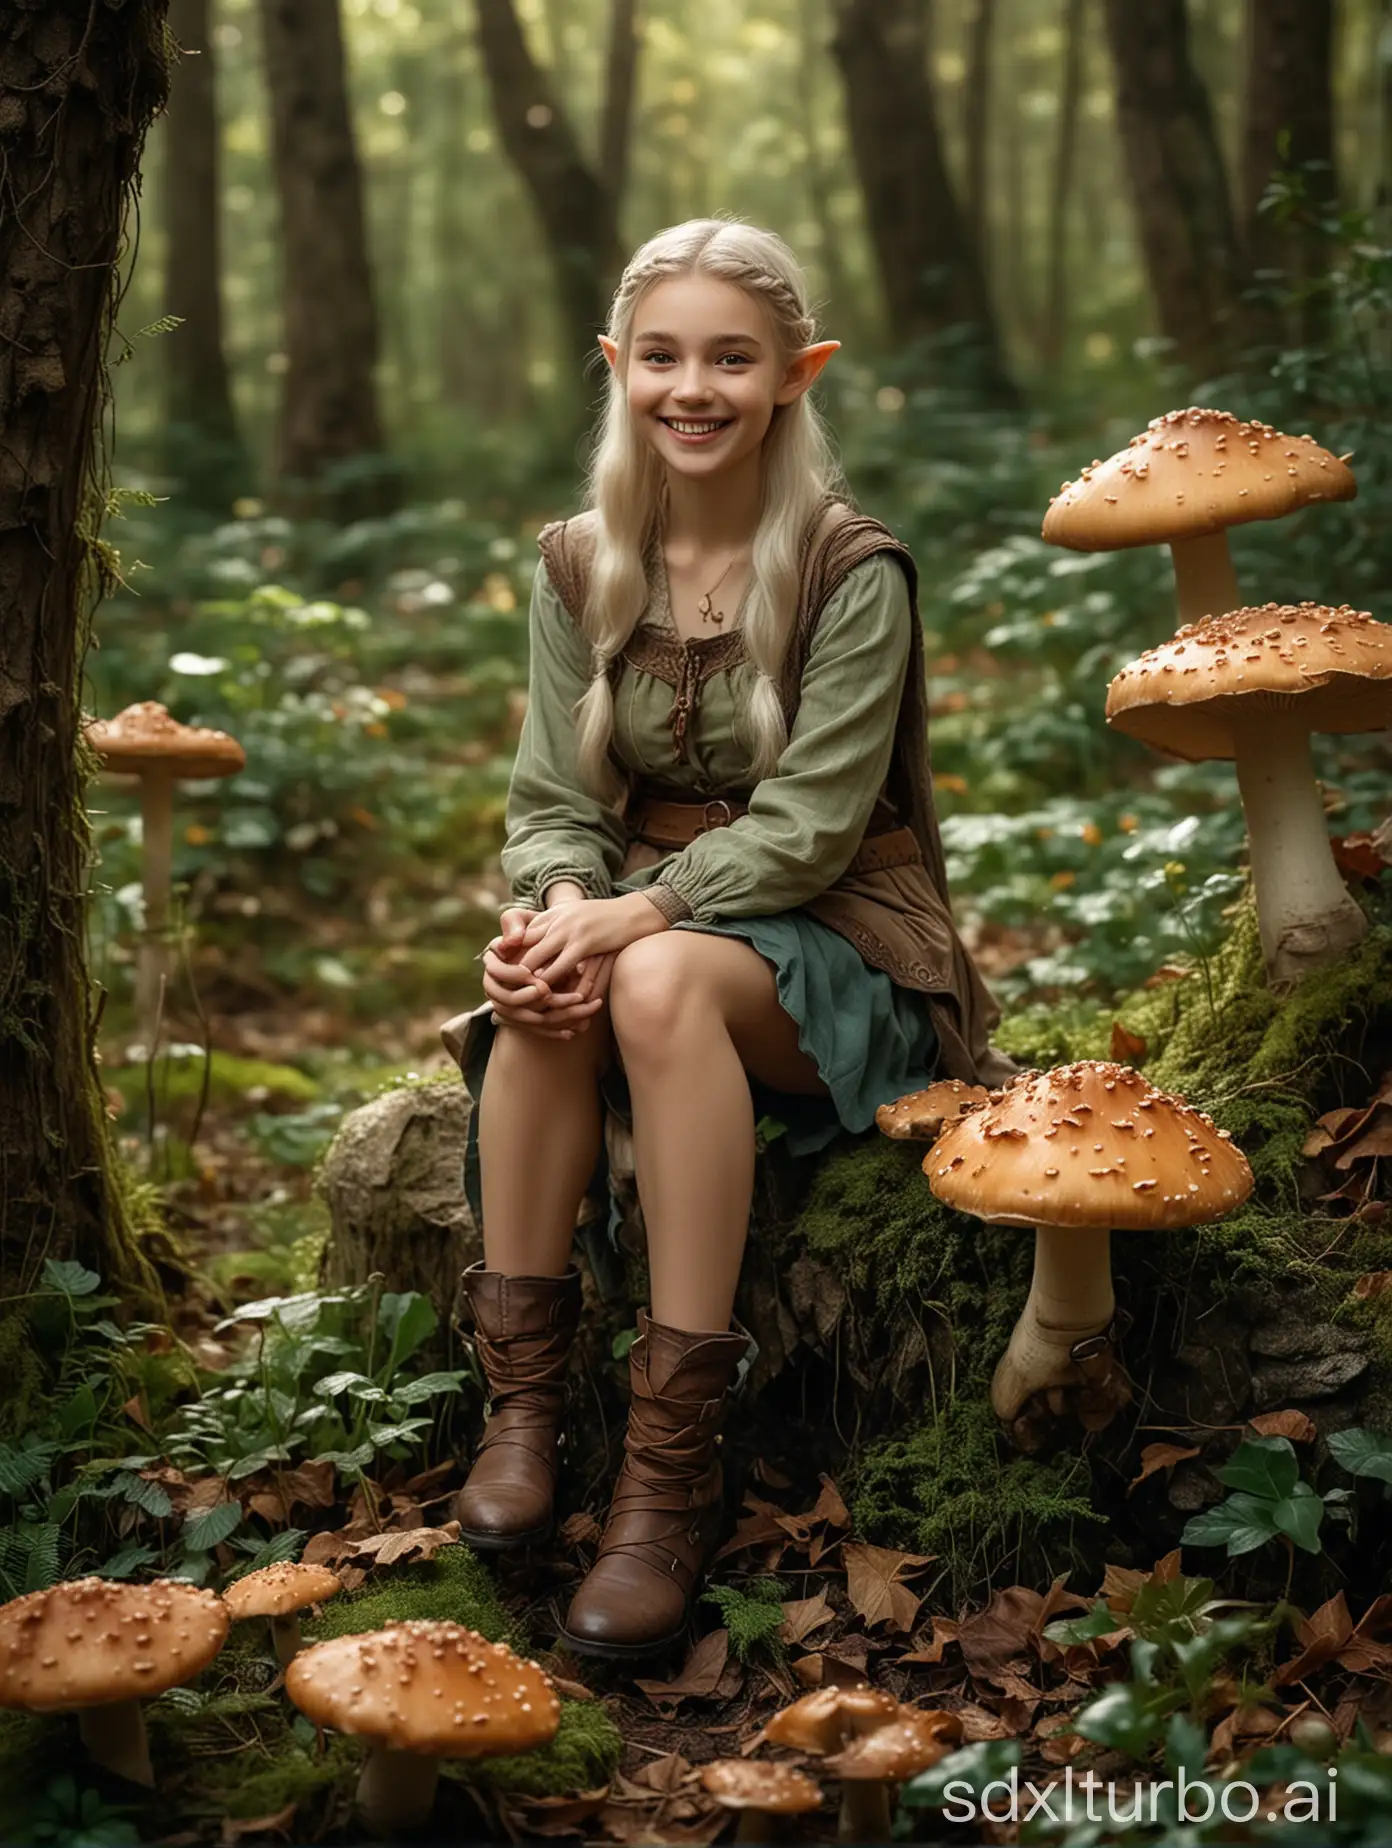 Smiling-Elven-Girl-Sitting-on-Mushroom-in-Hasselblad-Photography